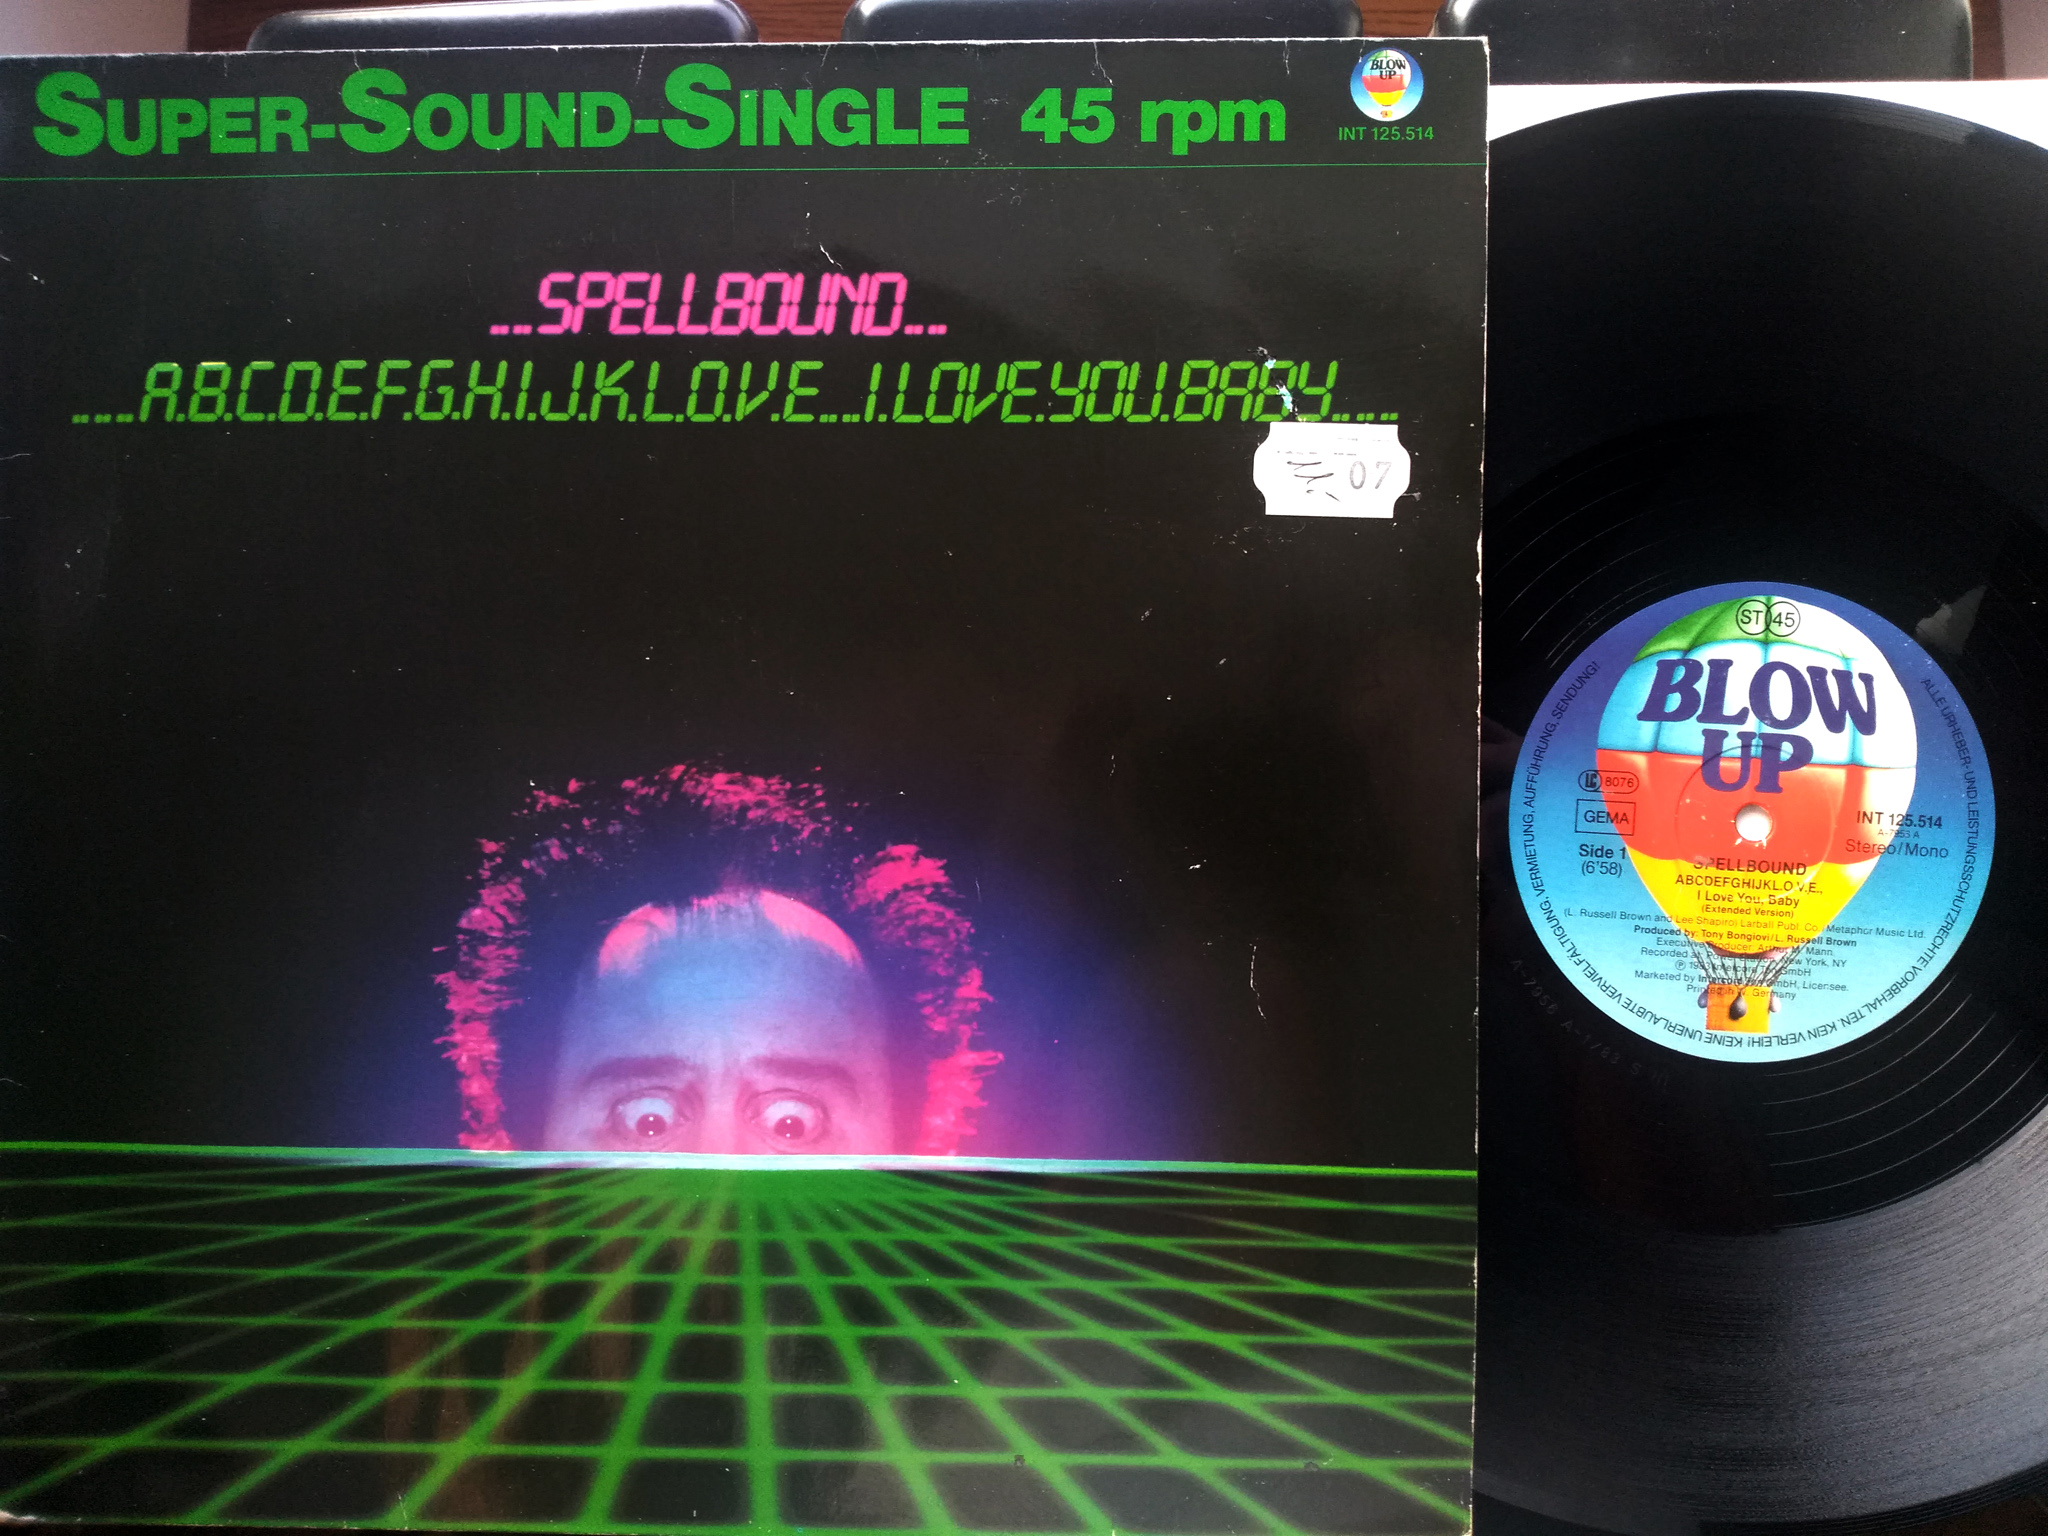 Spellbound - A.B.C.D.E.F.G.H.I.J.K.L.O.V.E I Love You